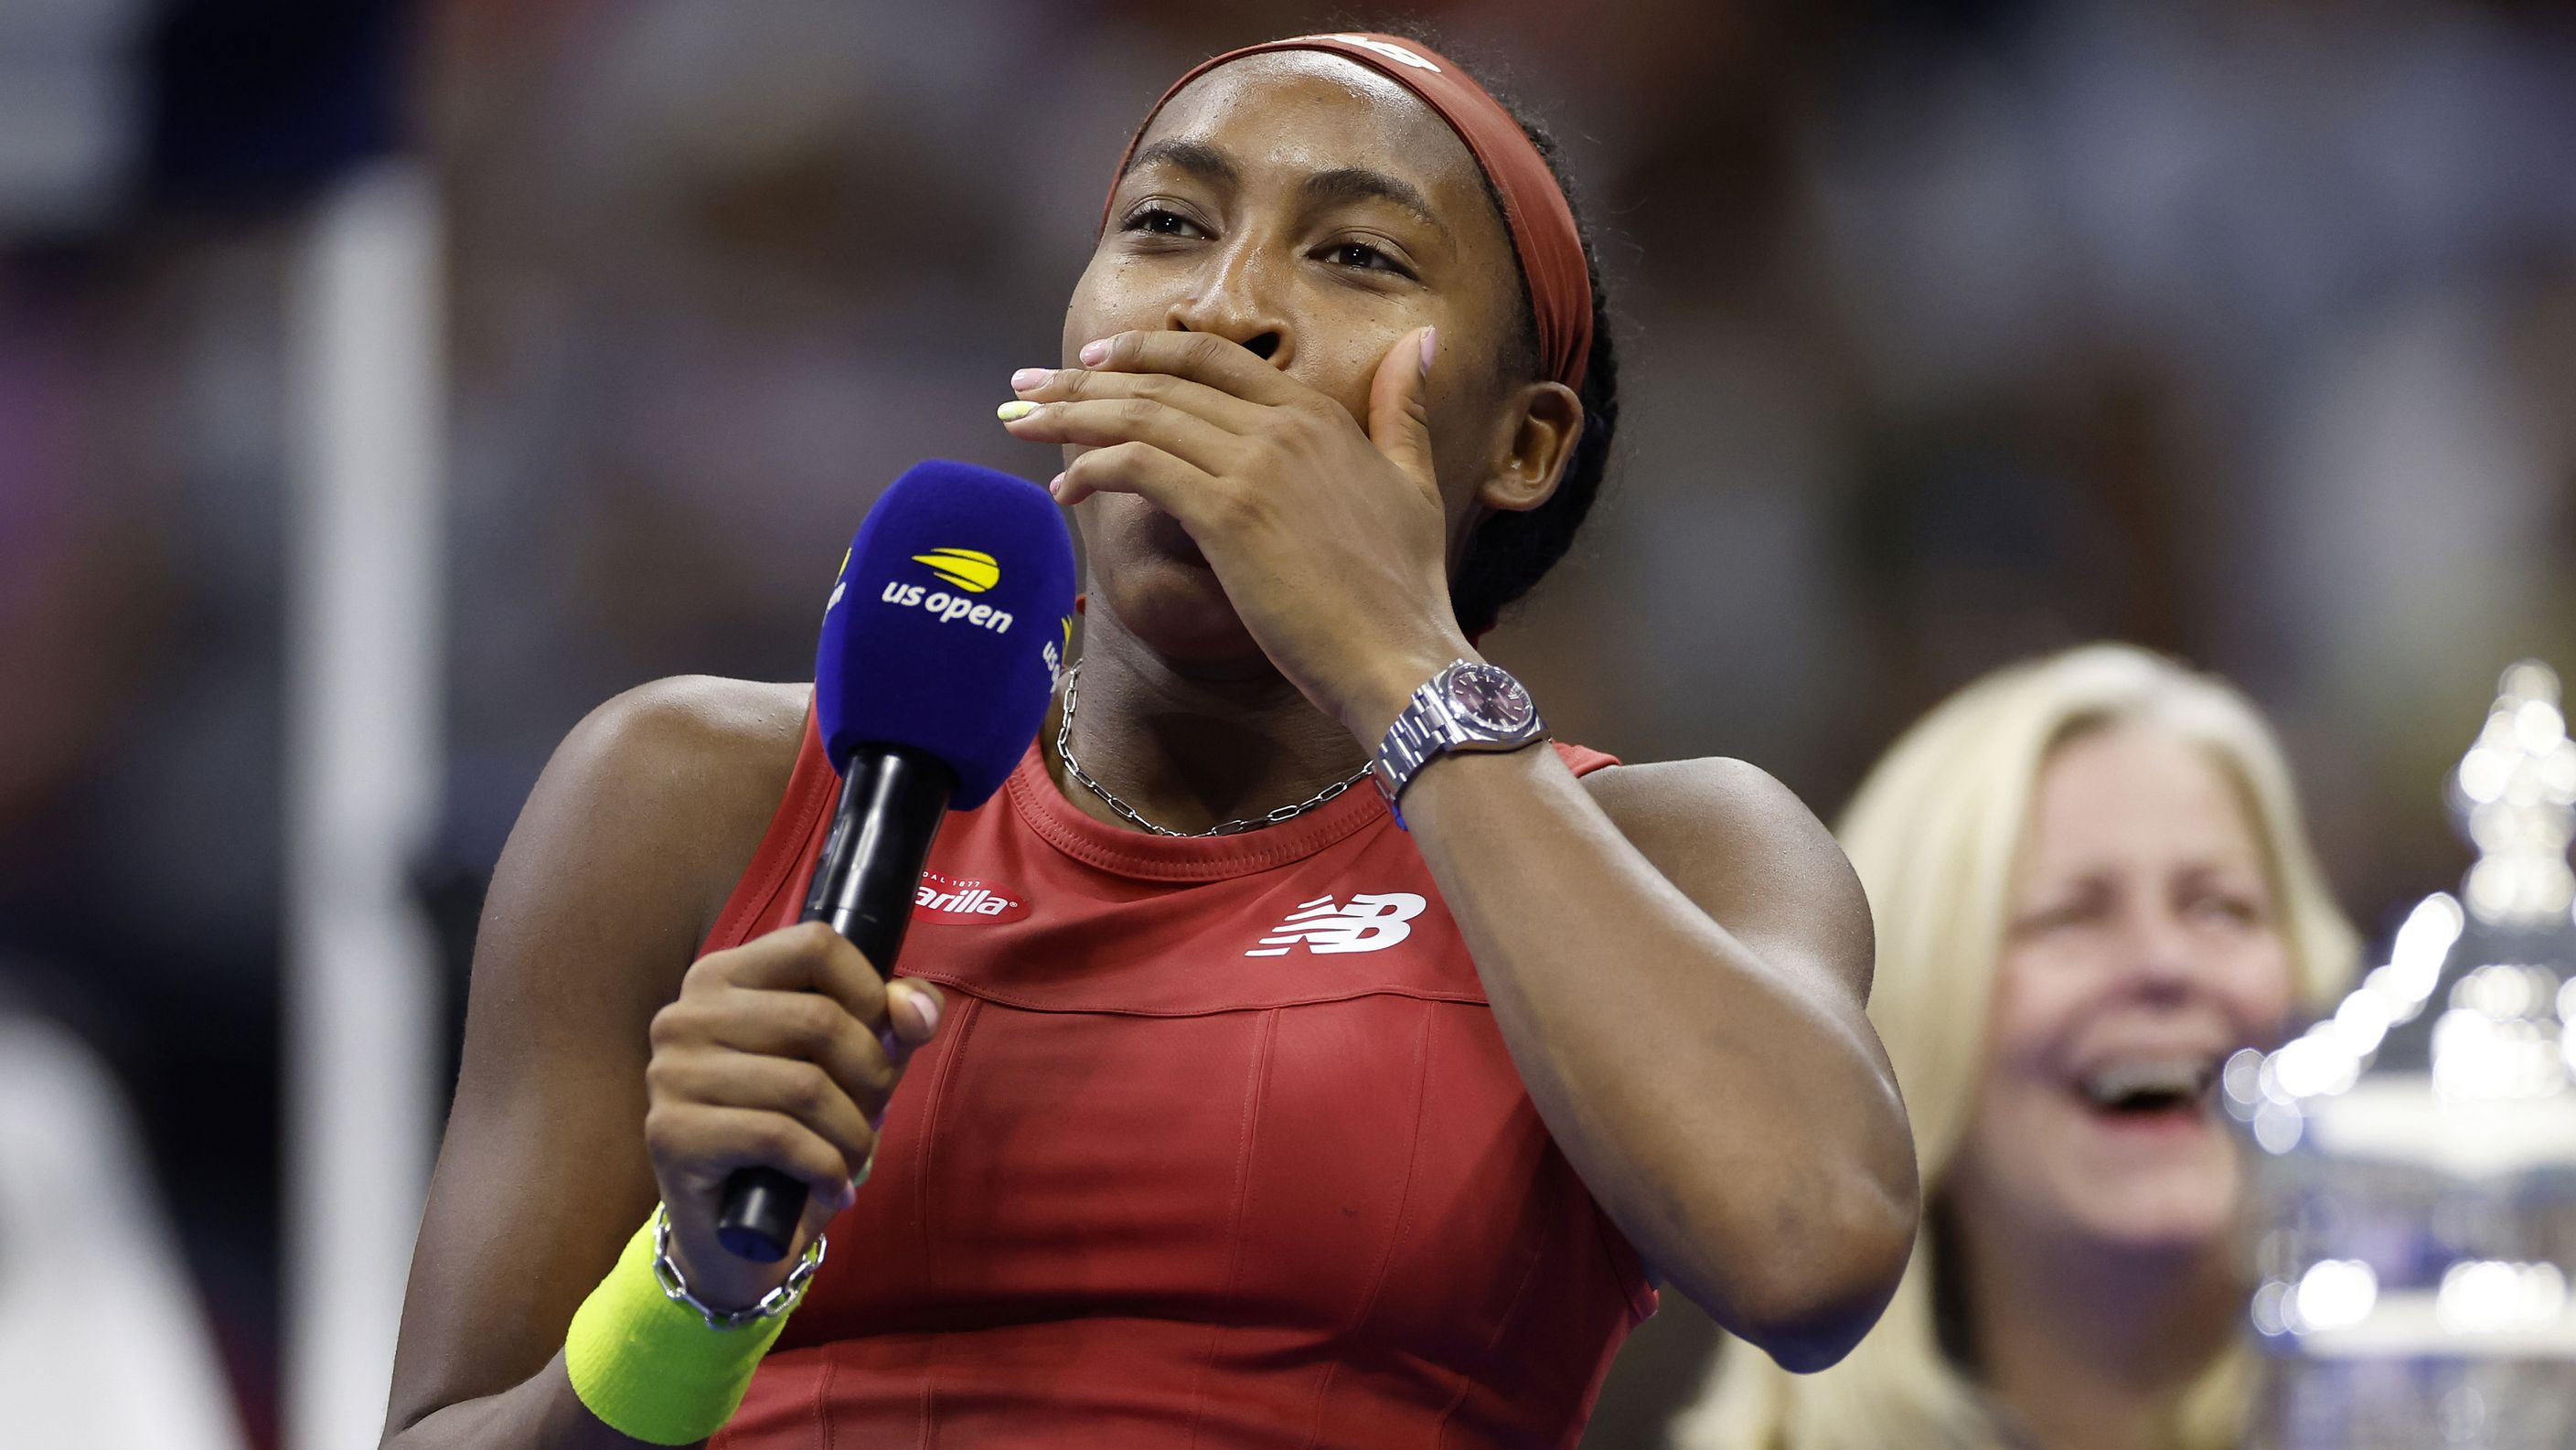 Coco Gauff of the United States is interviewed after defeating Aryna Sabalenka of Belarus in their Women&#x27;s Singles Final match on Day Thirteen of the 2023 US Open at the USTA Billie Jean King National Tennis Center on September 09, 2023 in the Flushing neighborhood of the Queens borough of New York City. (Photo by Sarah Stier/Getty Images)